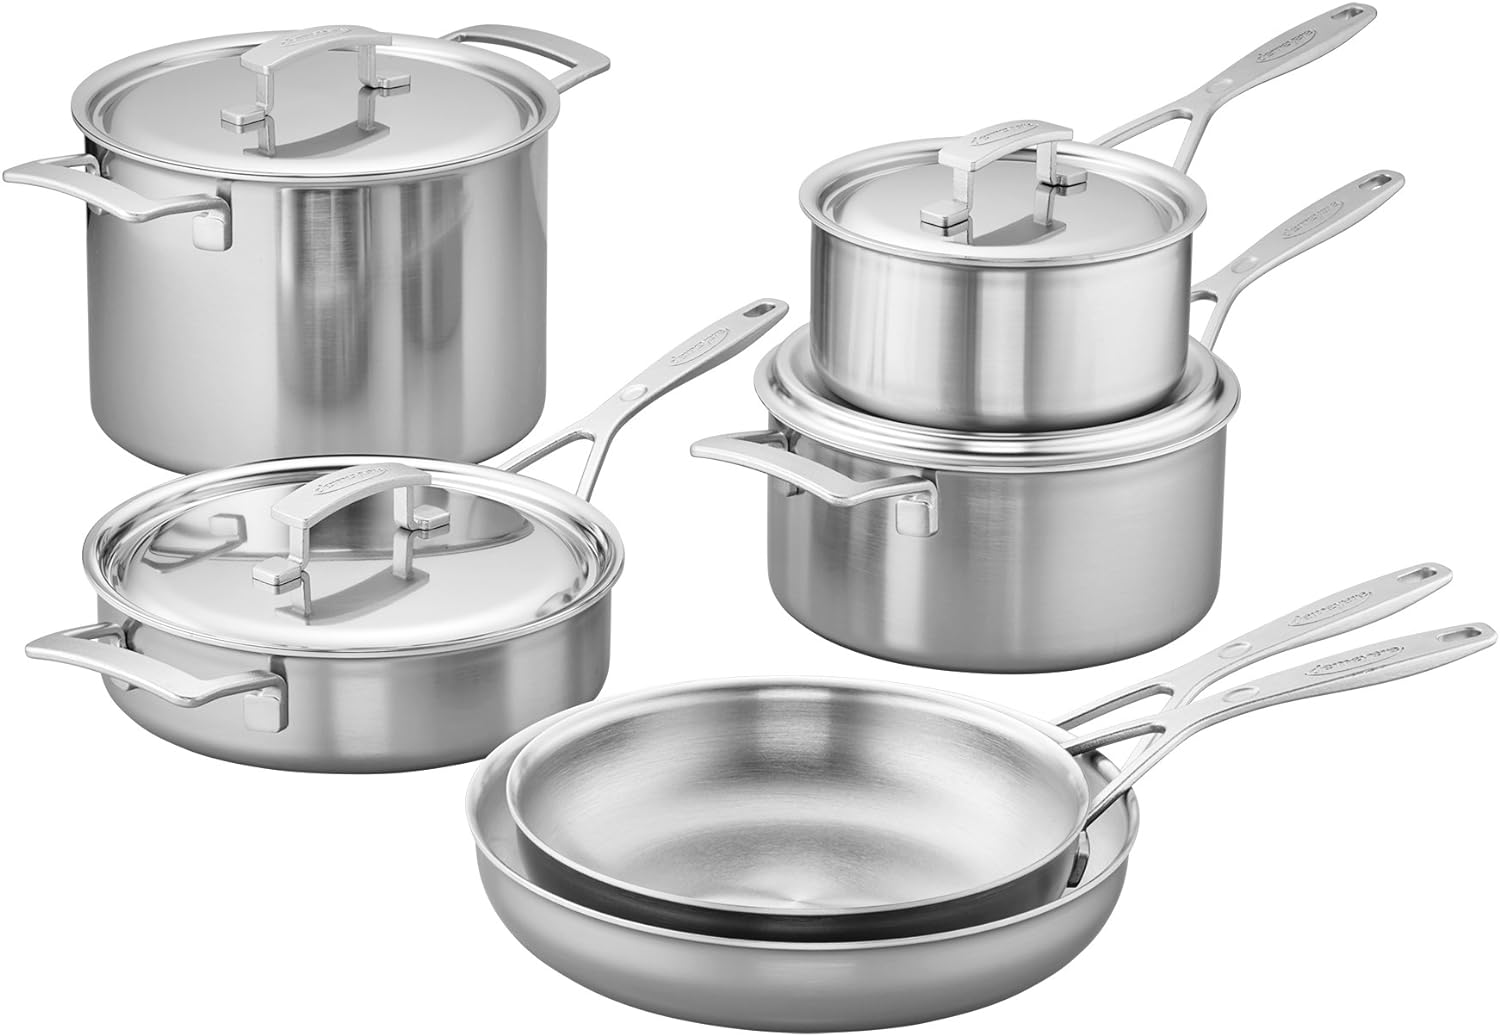 Demeyere Industry 5-Ply 10-pc Stainless Steel Cookware Set 